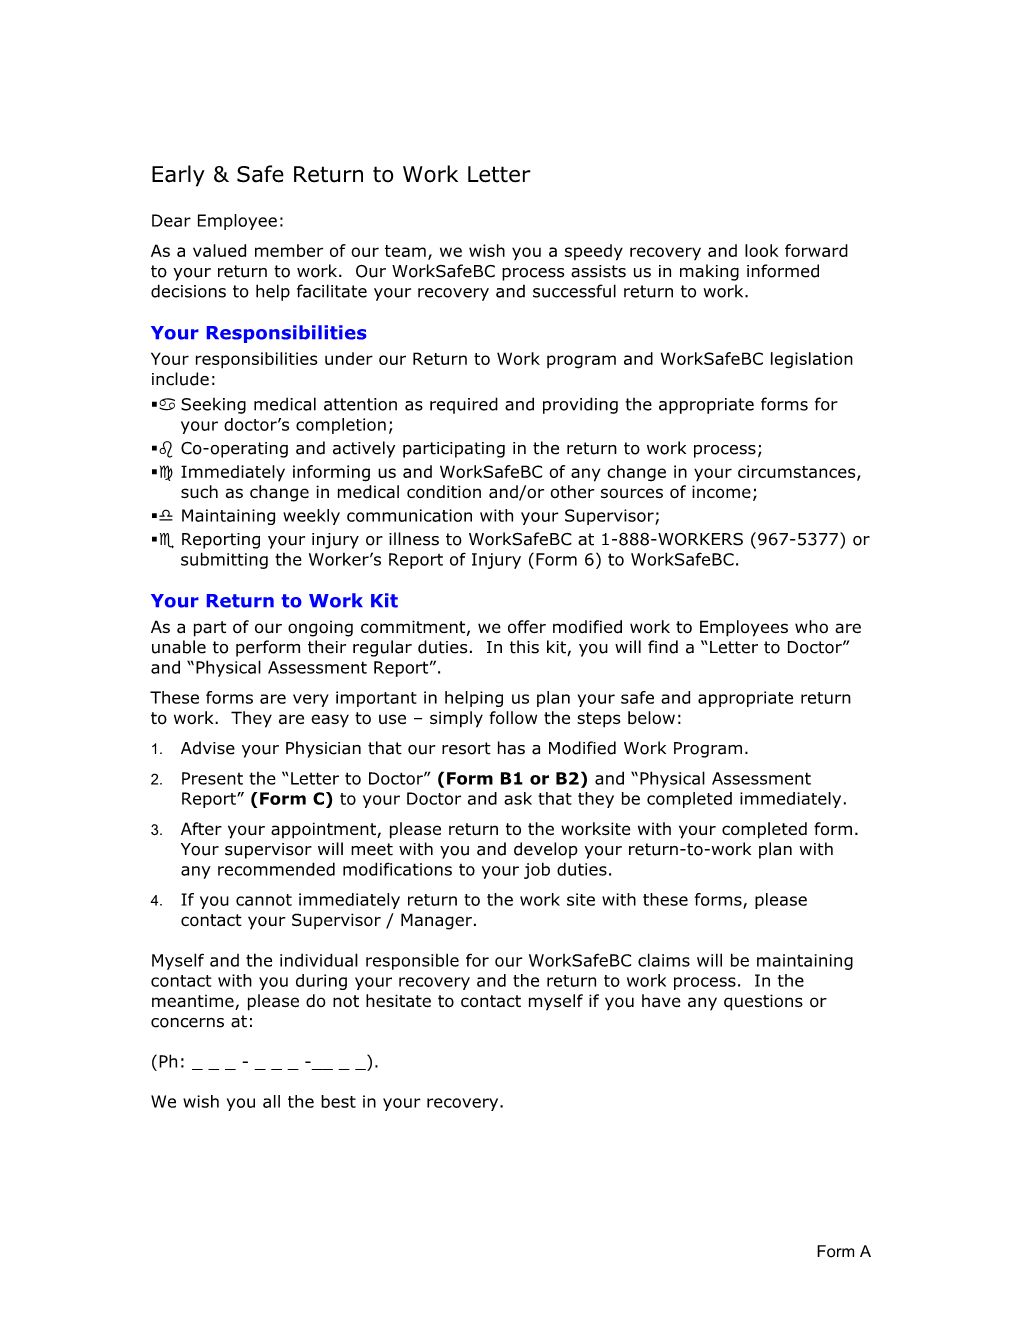 Early & Safe Return to Work Letter